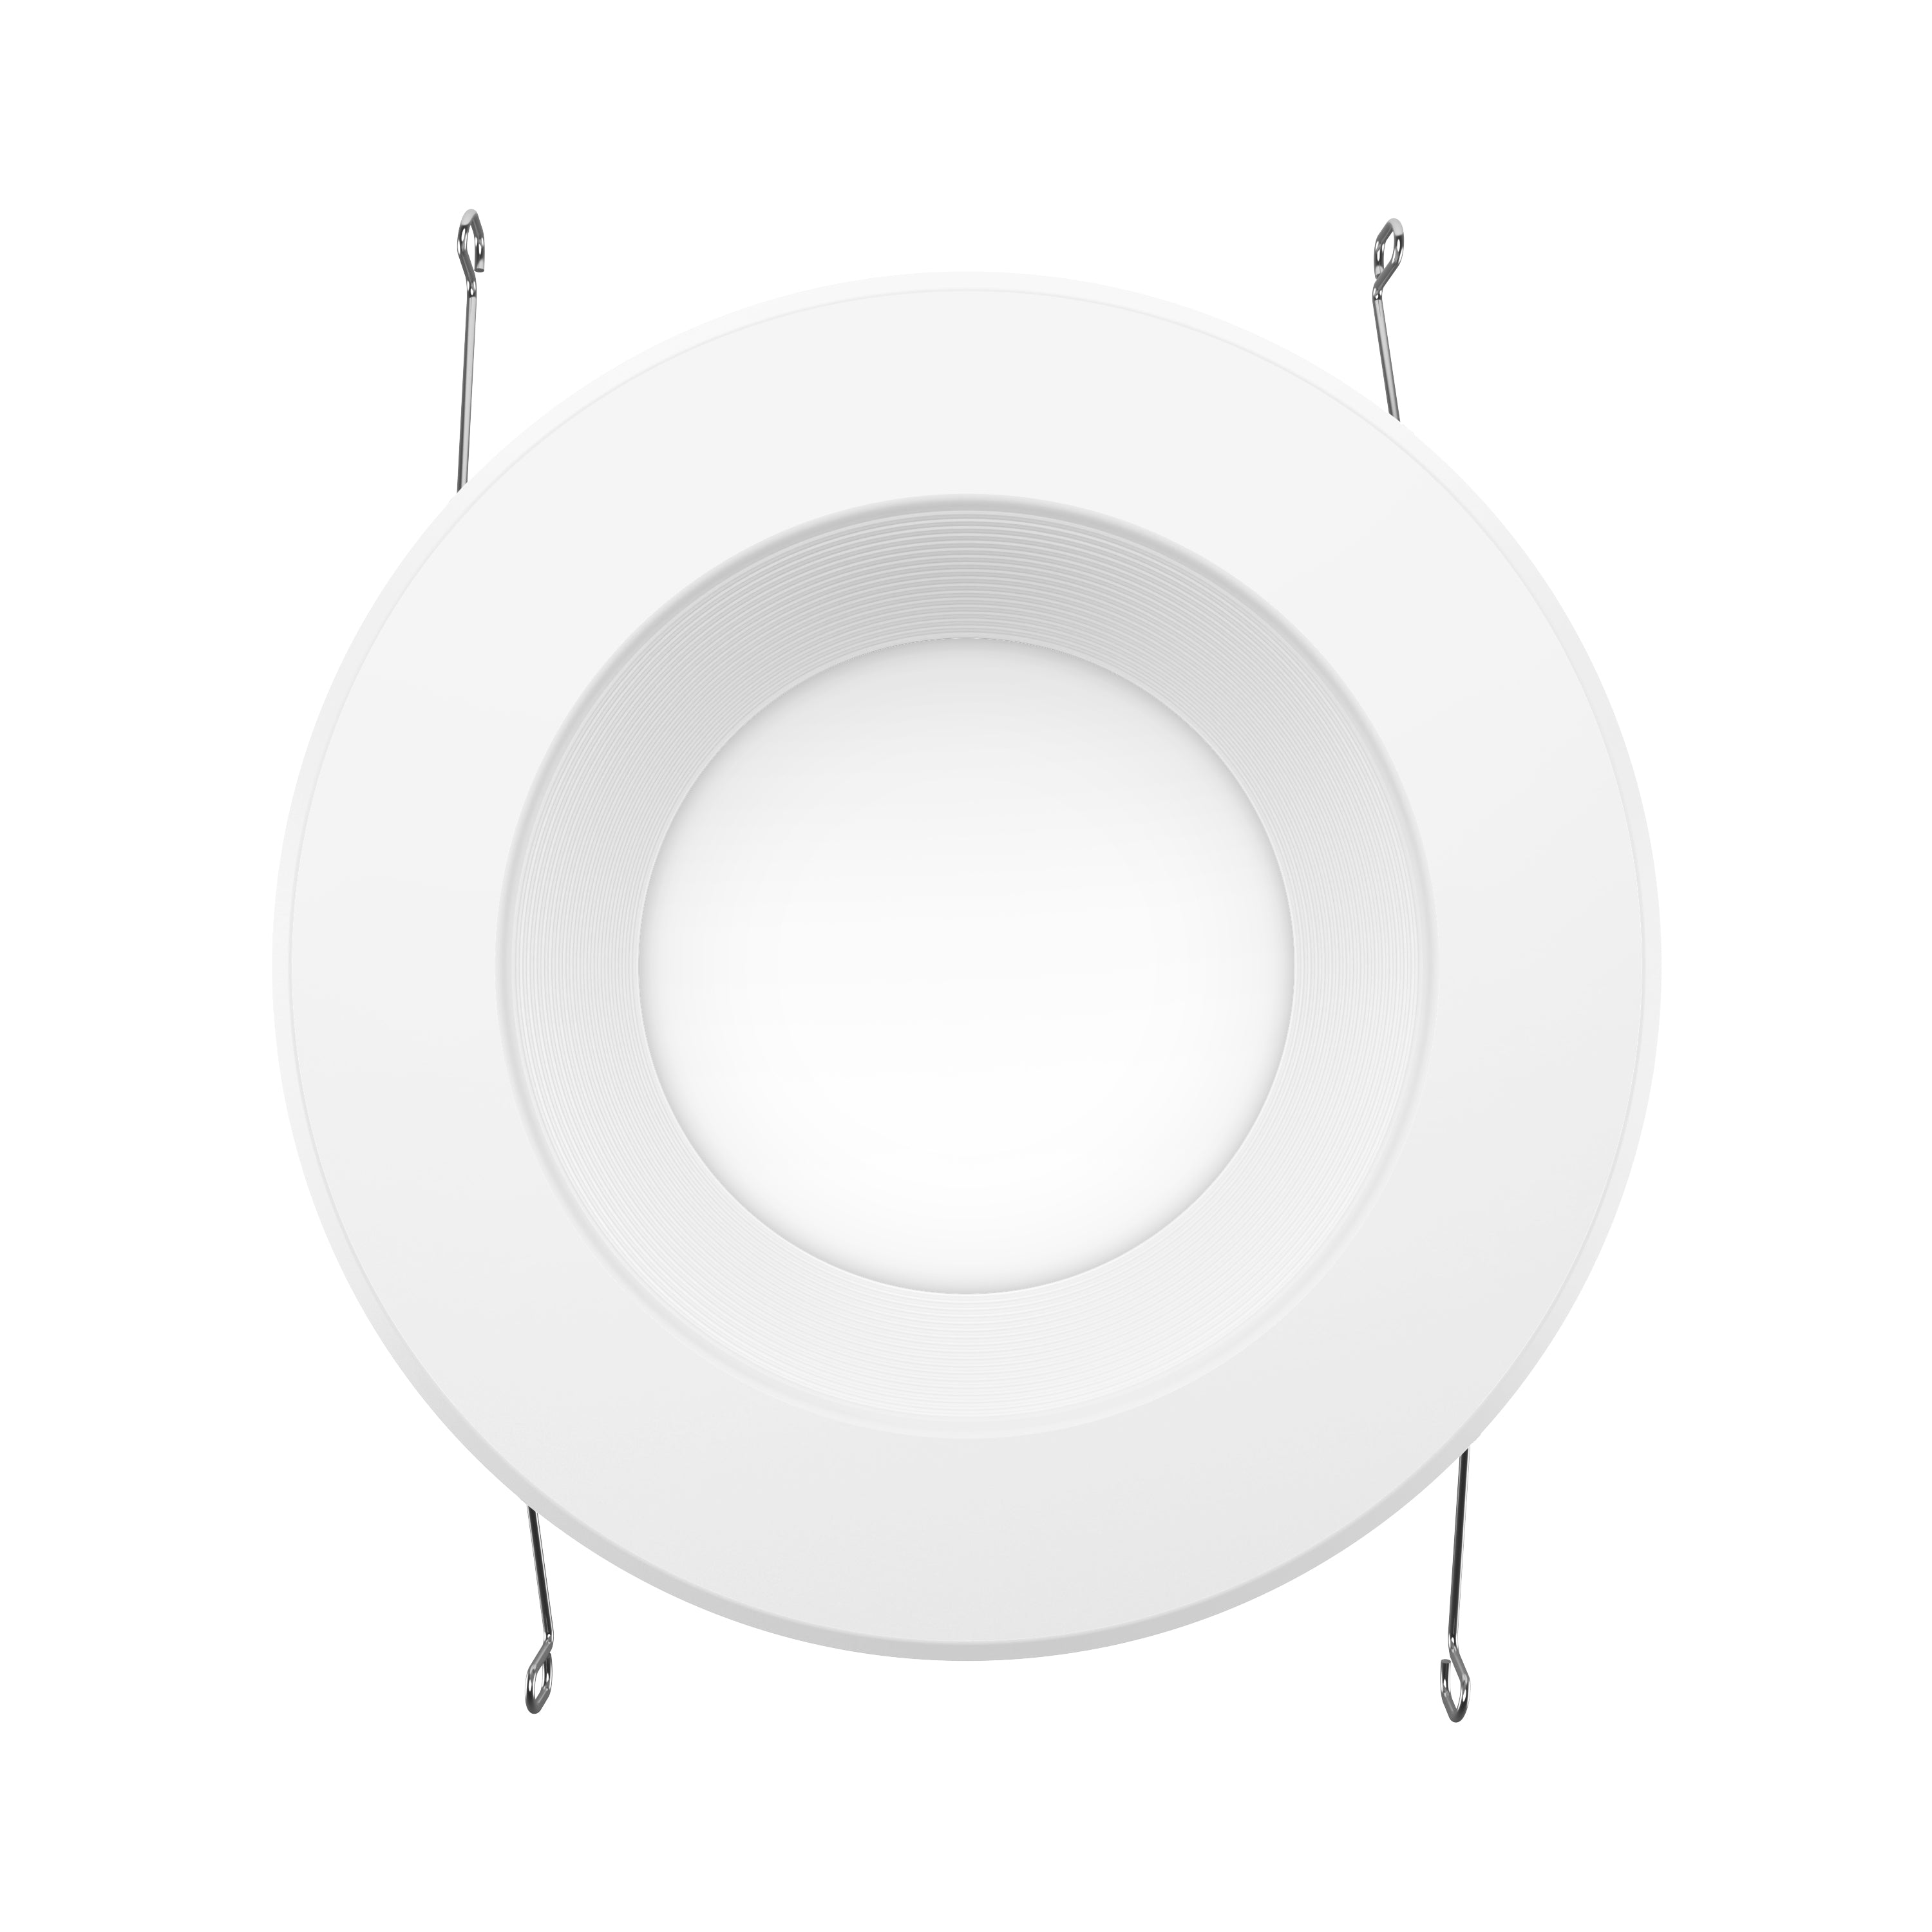 6 LED Slim Downlight - 14W=75W Replacement - Dimmable - Damp Rated.